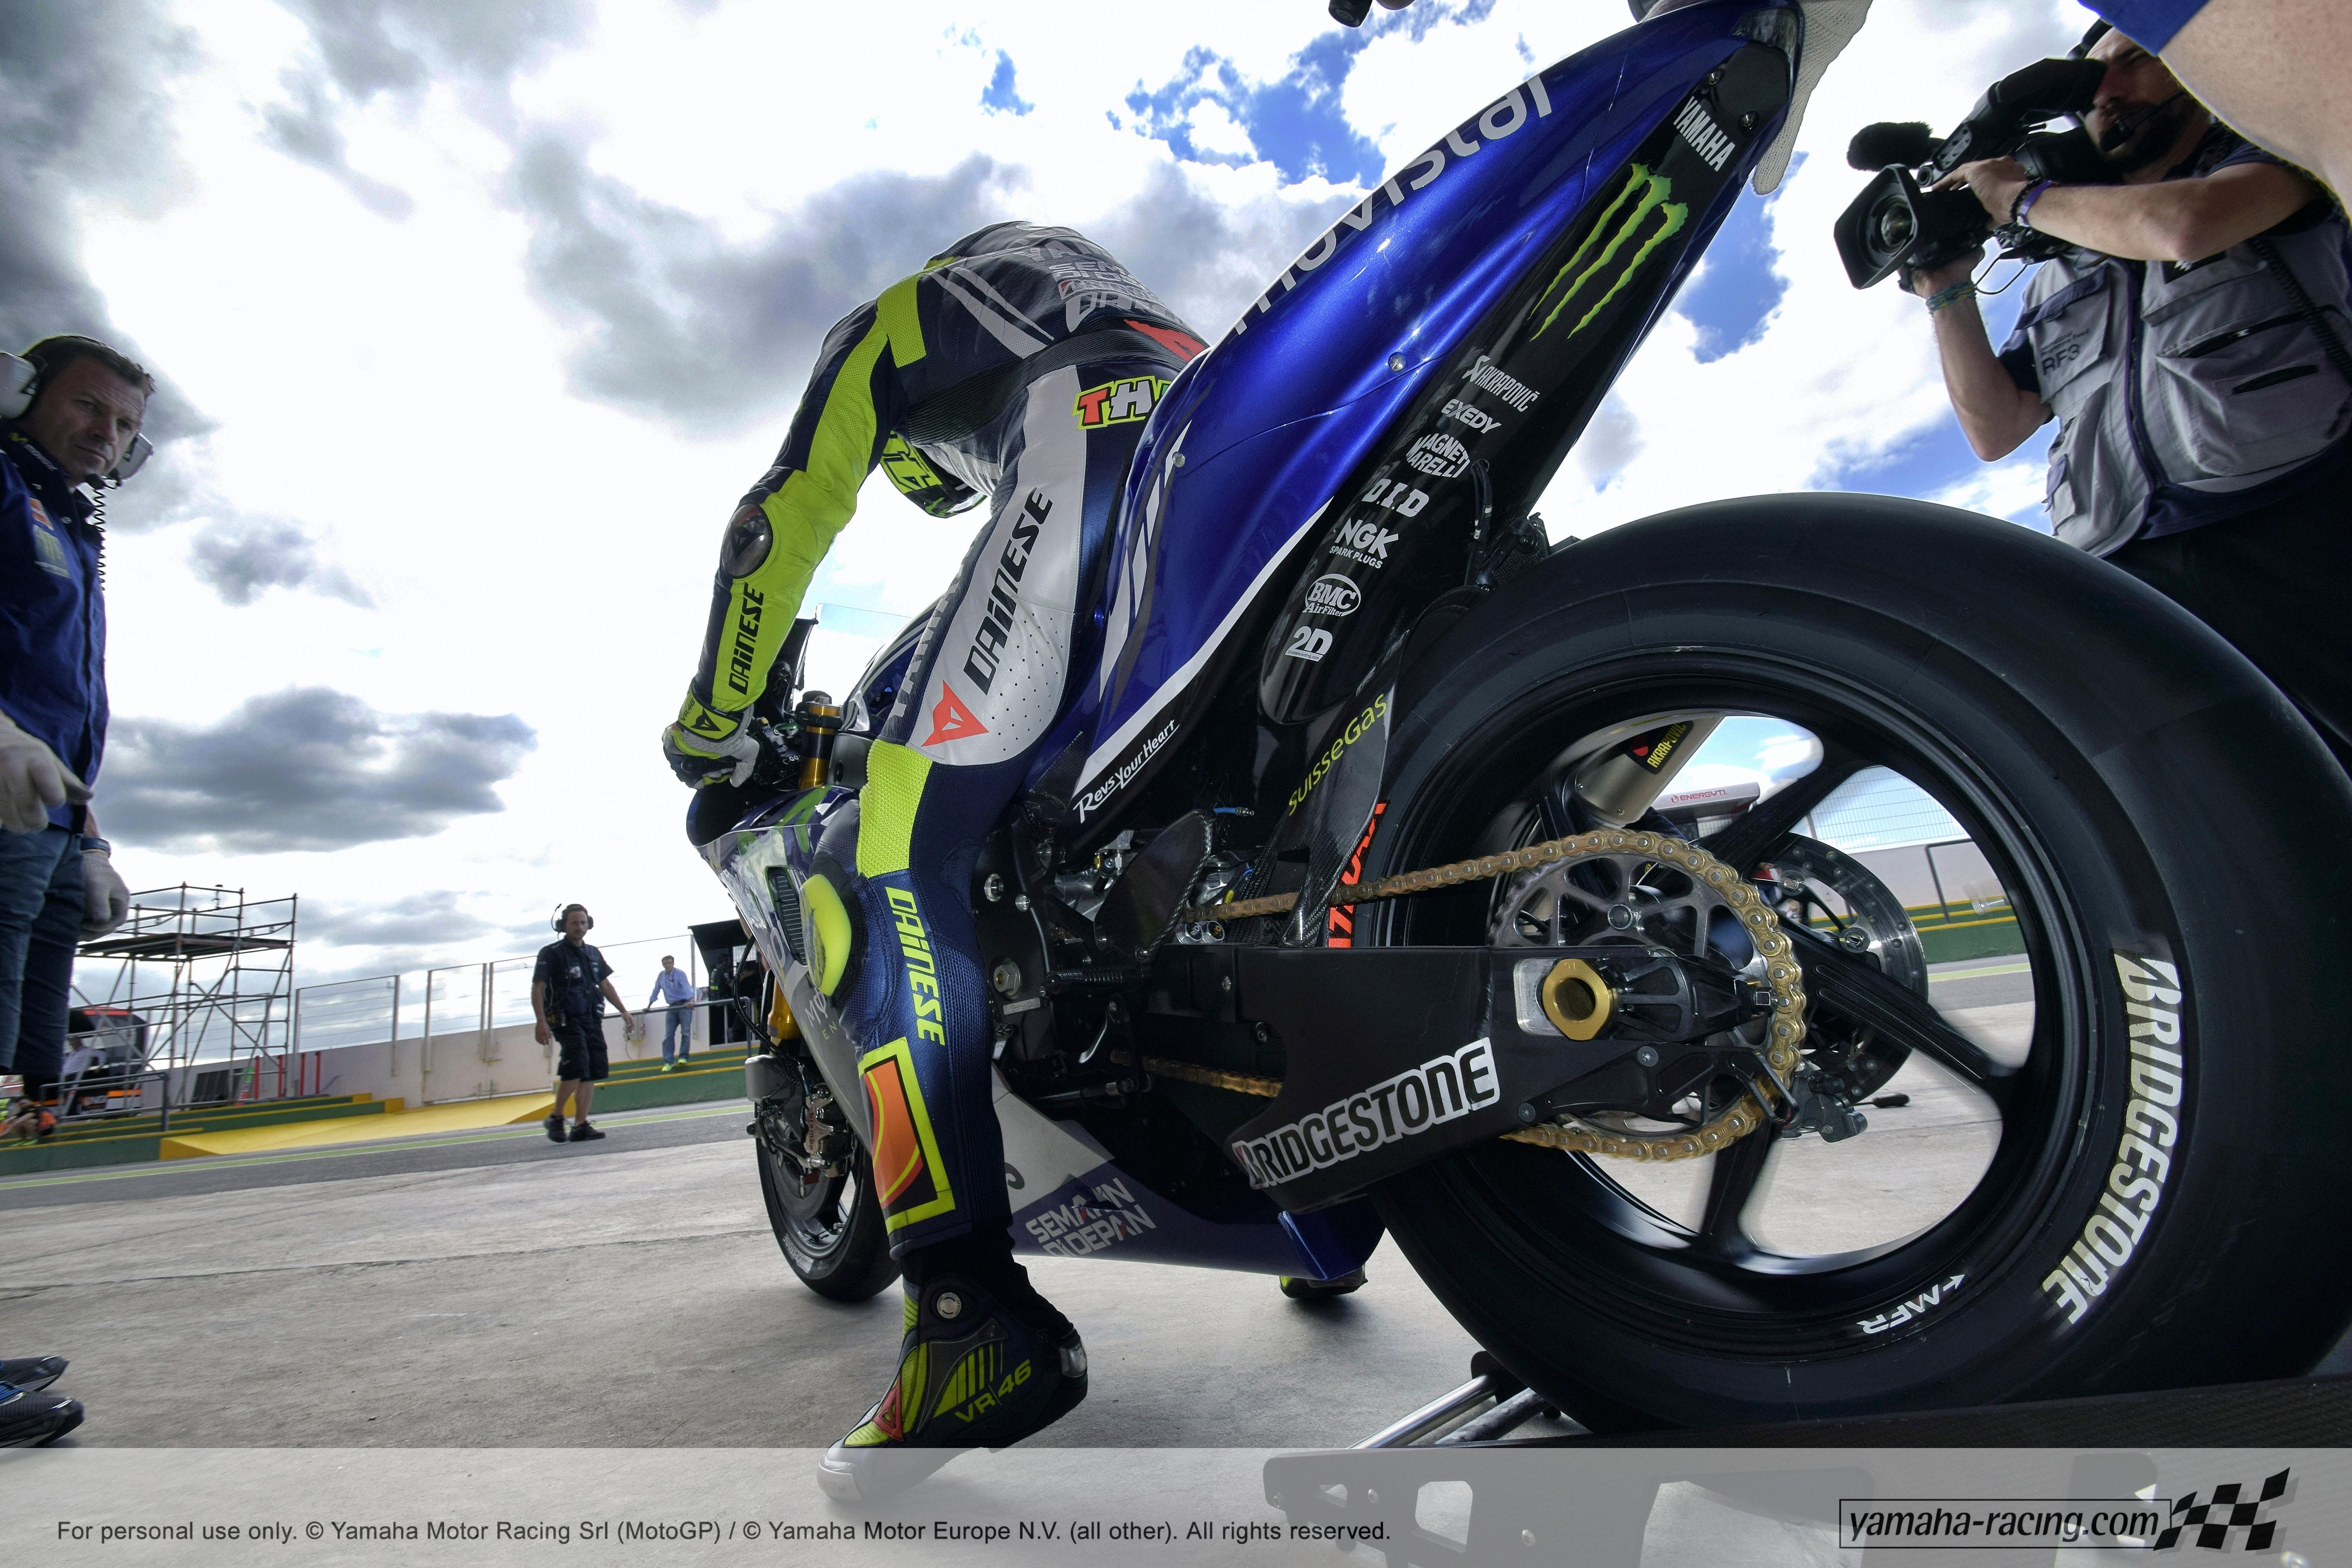 Valentino Rossi on a sports motorcycle wallpaper and image